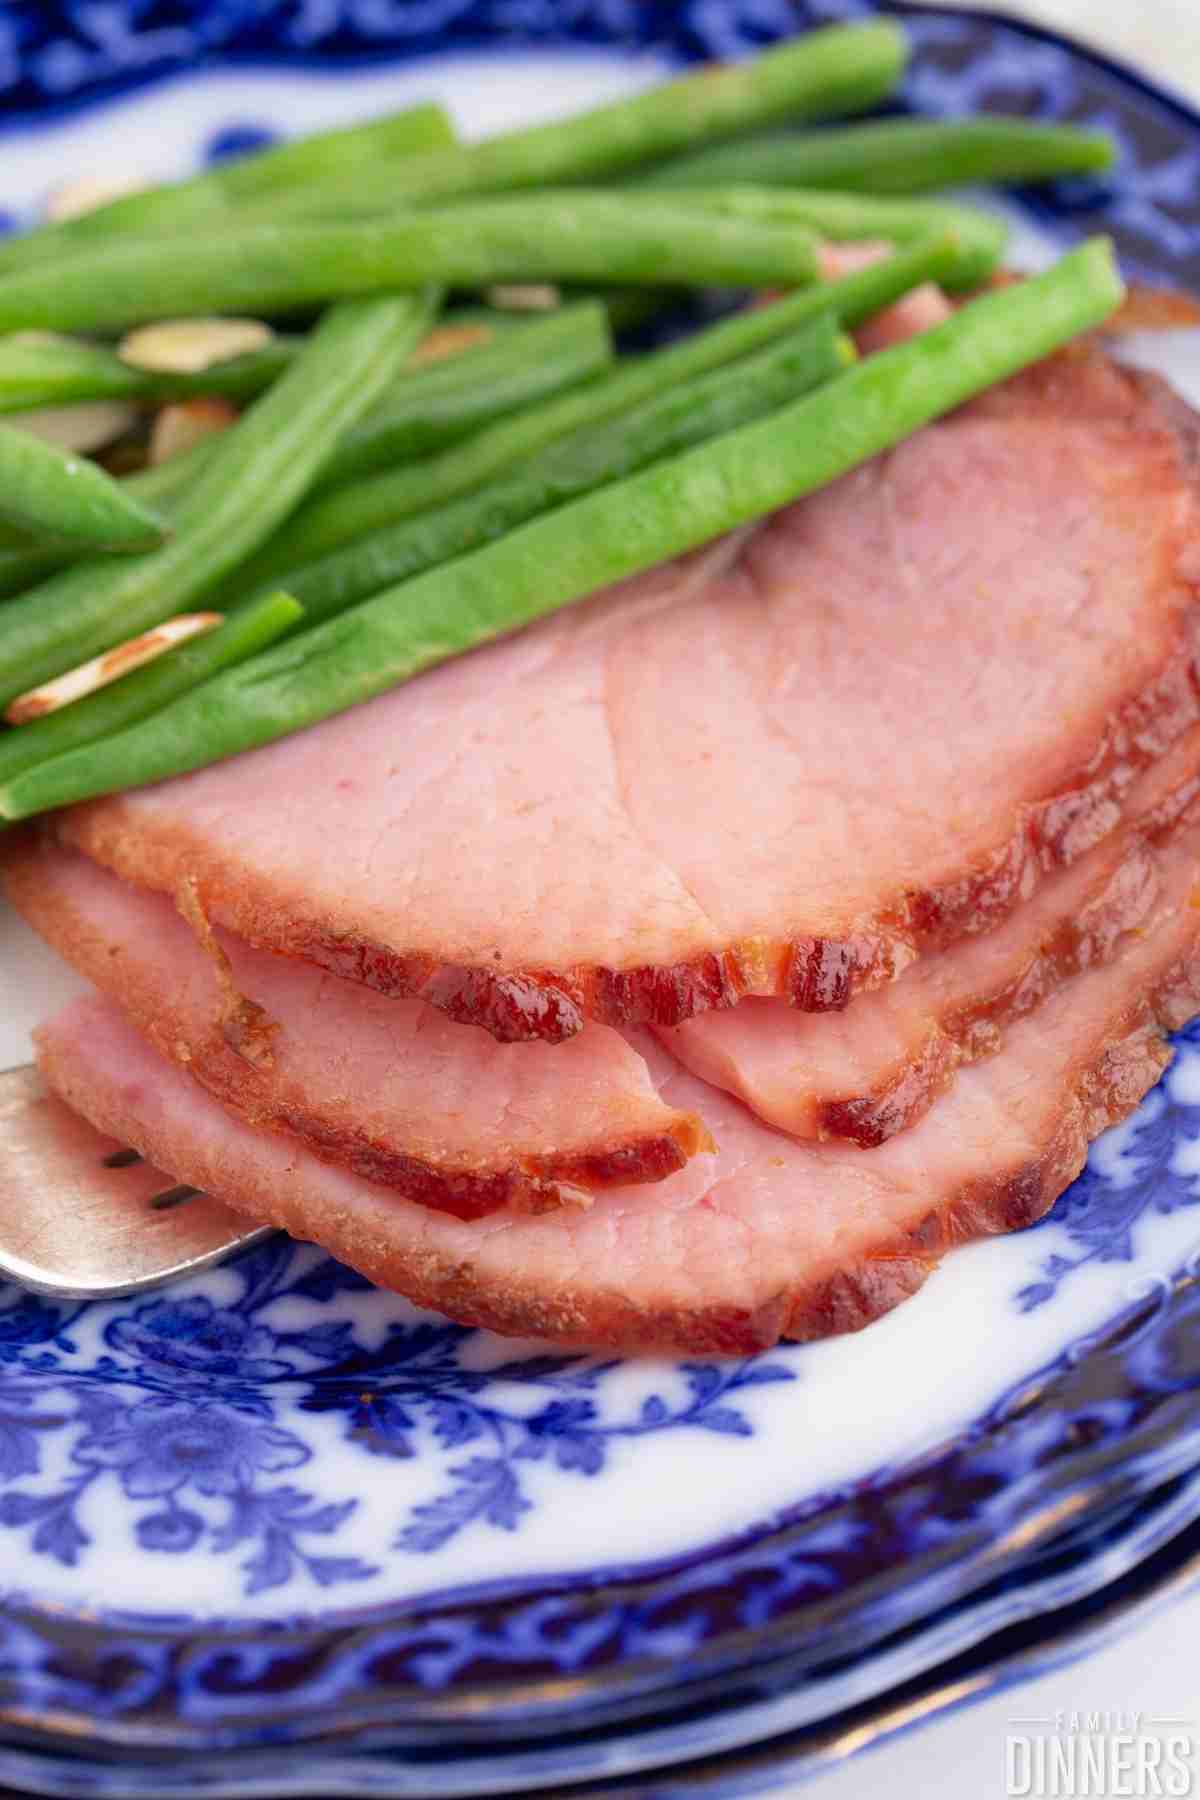 Three slices of ham on a plate with green beans and almond slivers.